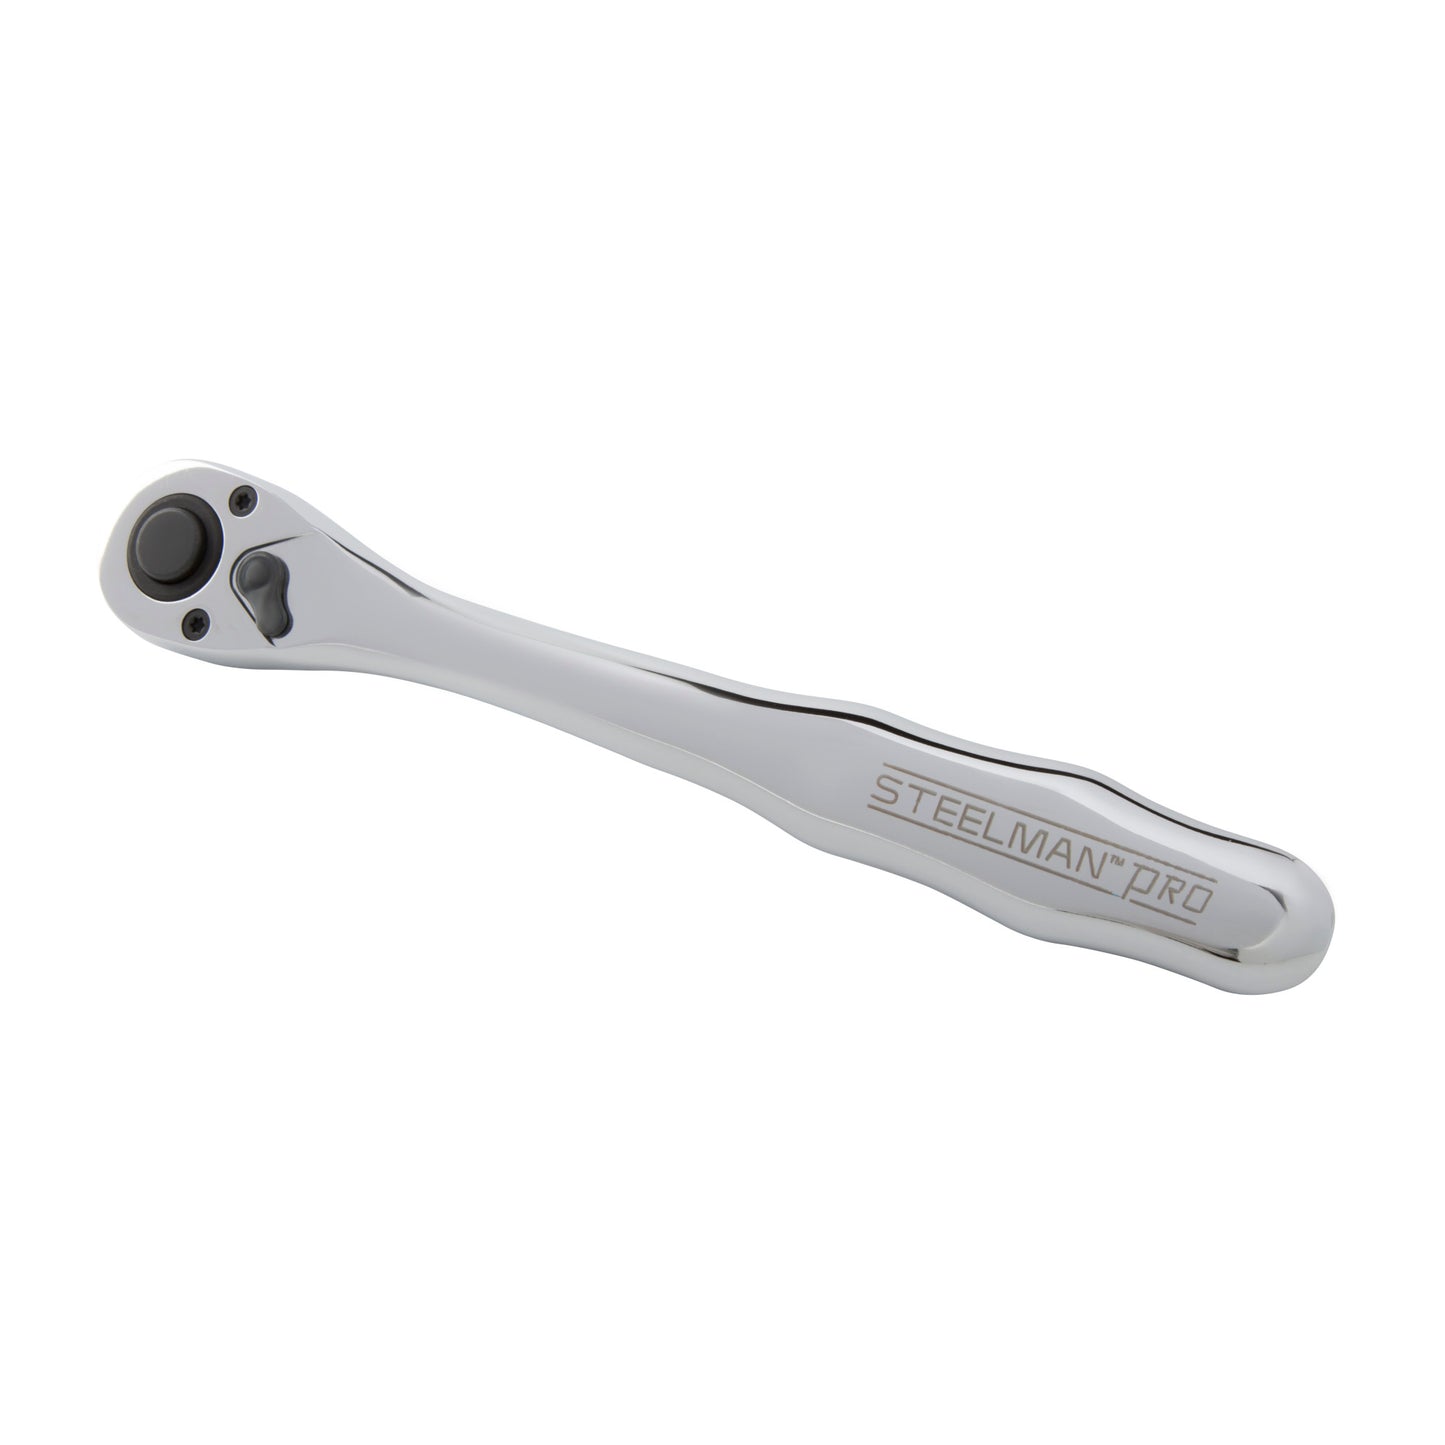 72-Tooth 1/2-inch Drive Thin Profile Ratchet with Offset Handle